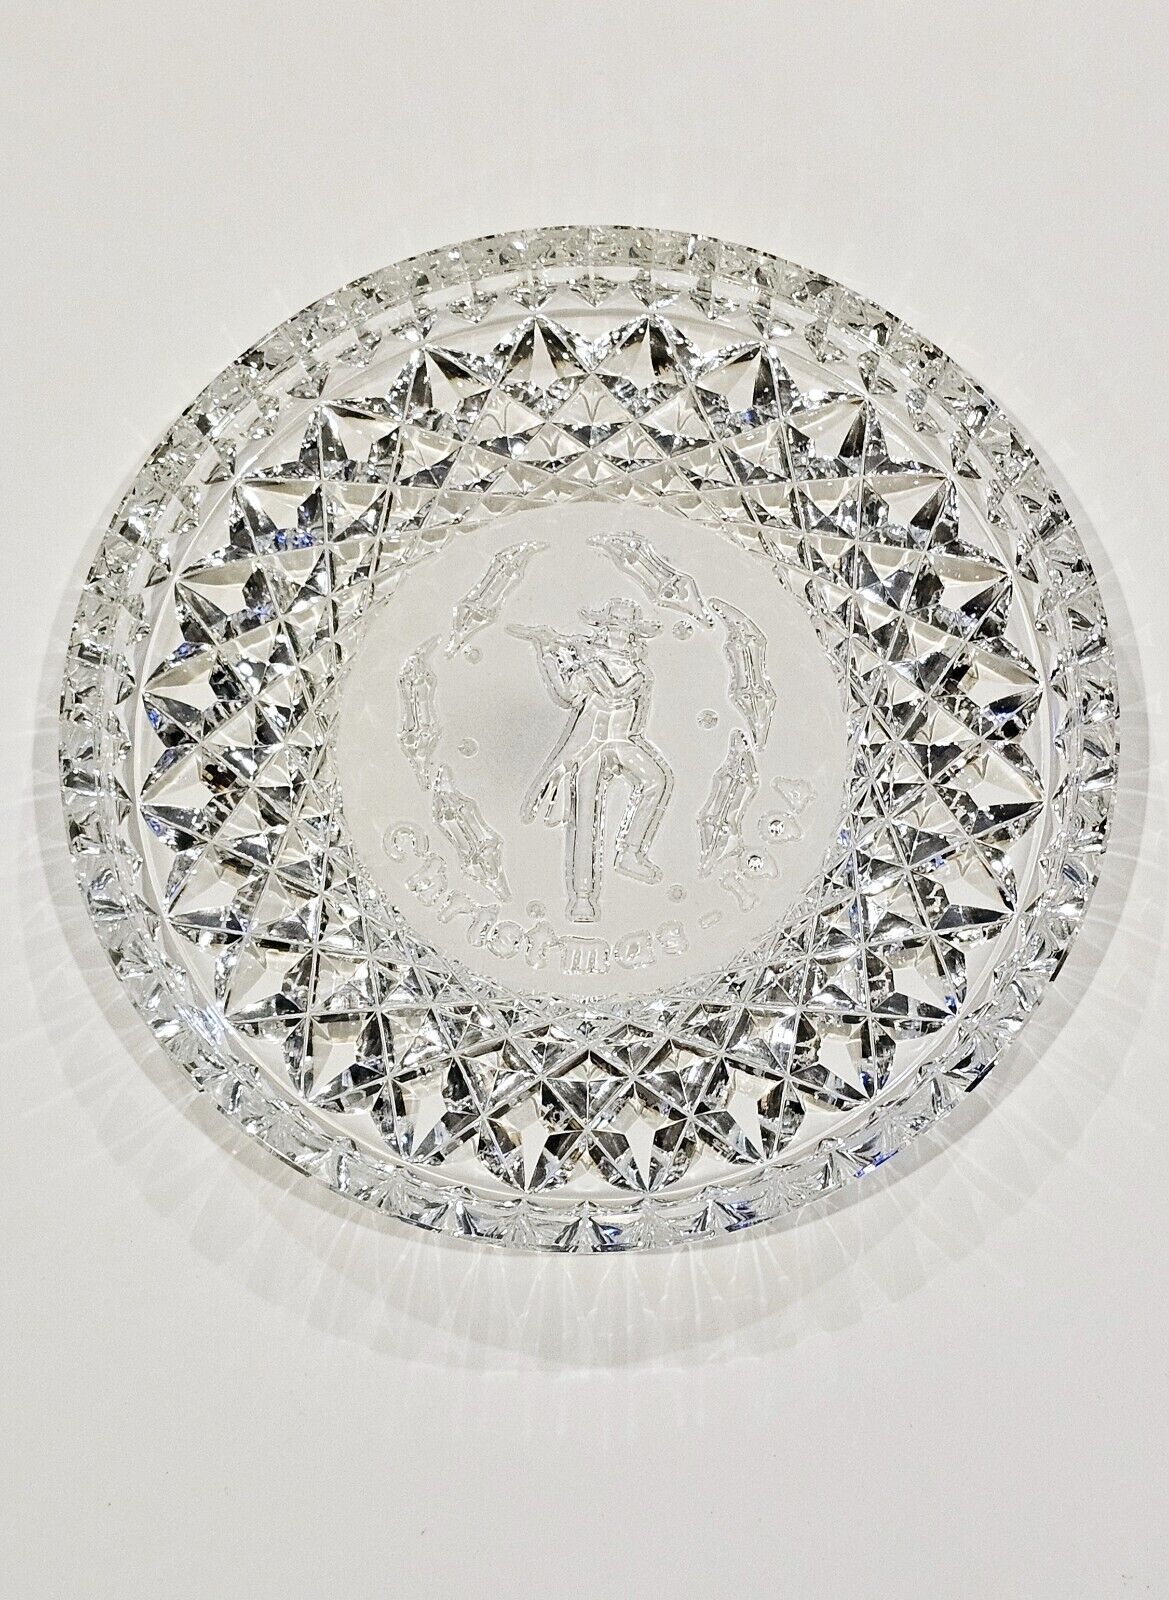 Vintage 1994 Waterford Crystal Plate 12 Days of Christmas Pipers piping 8”